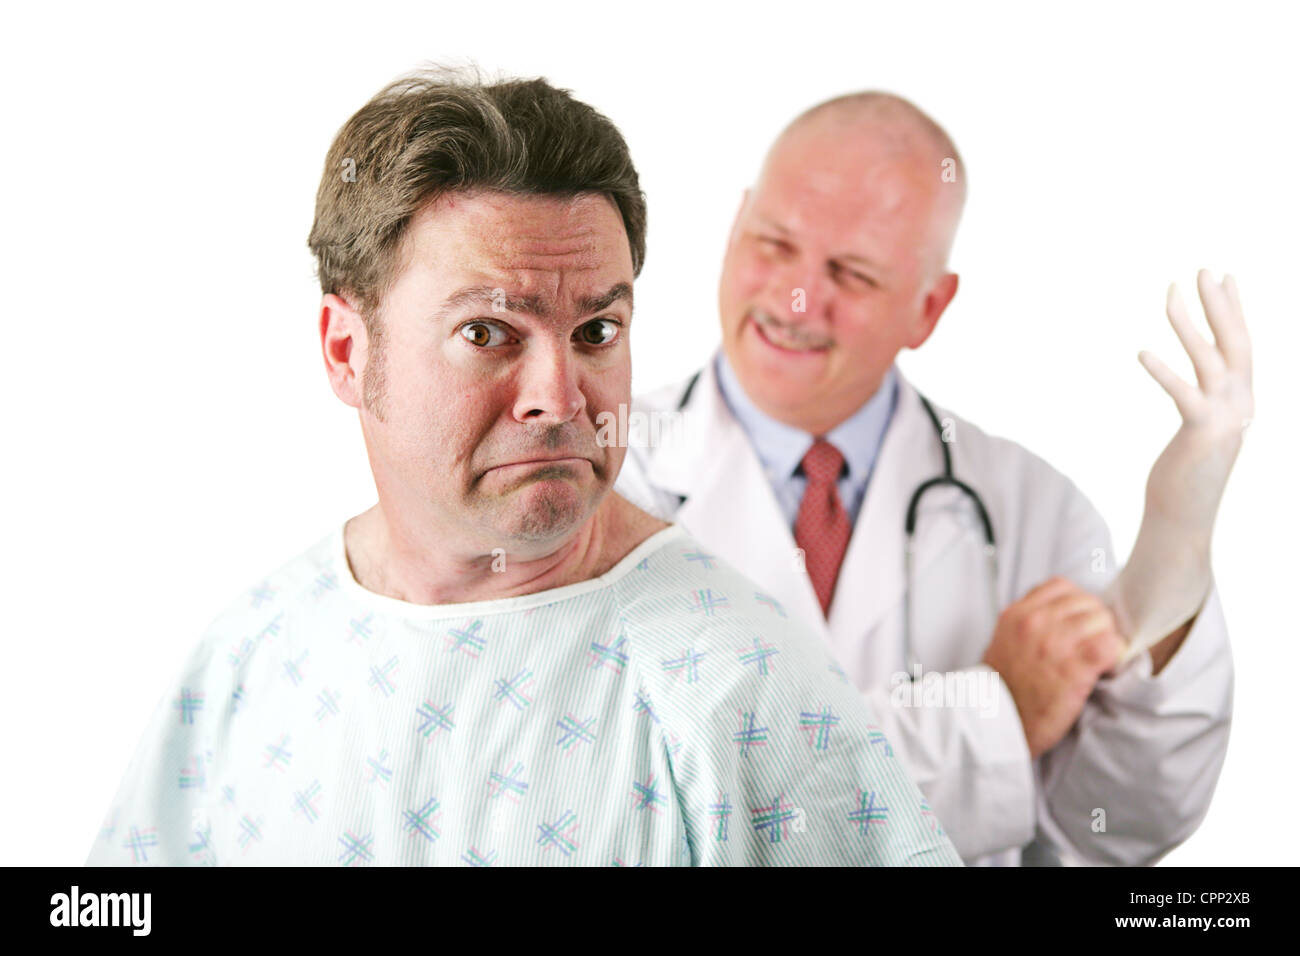 Nervous patient about to be examined by a doctor. Isolated on white. Stock Photo